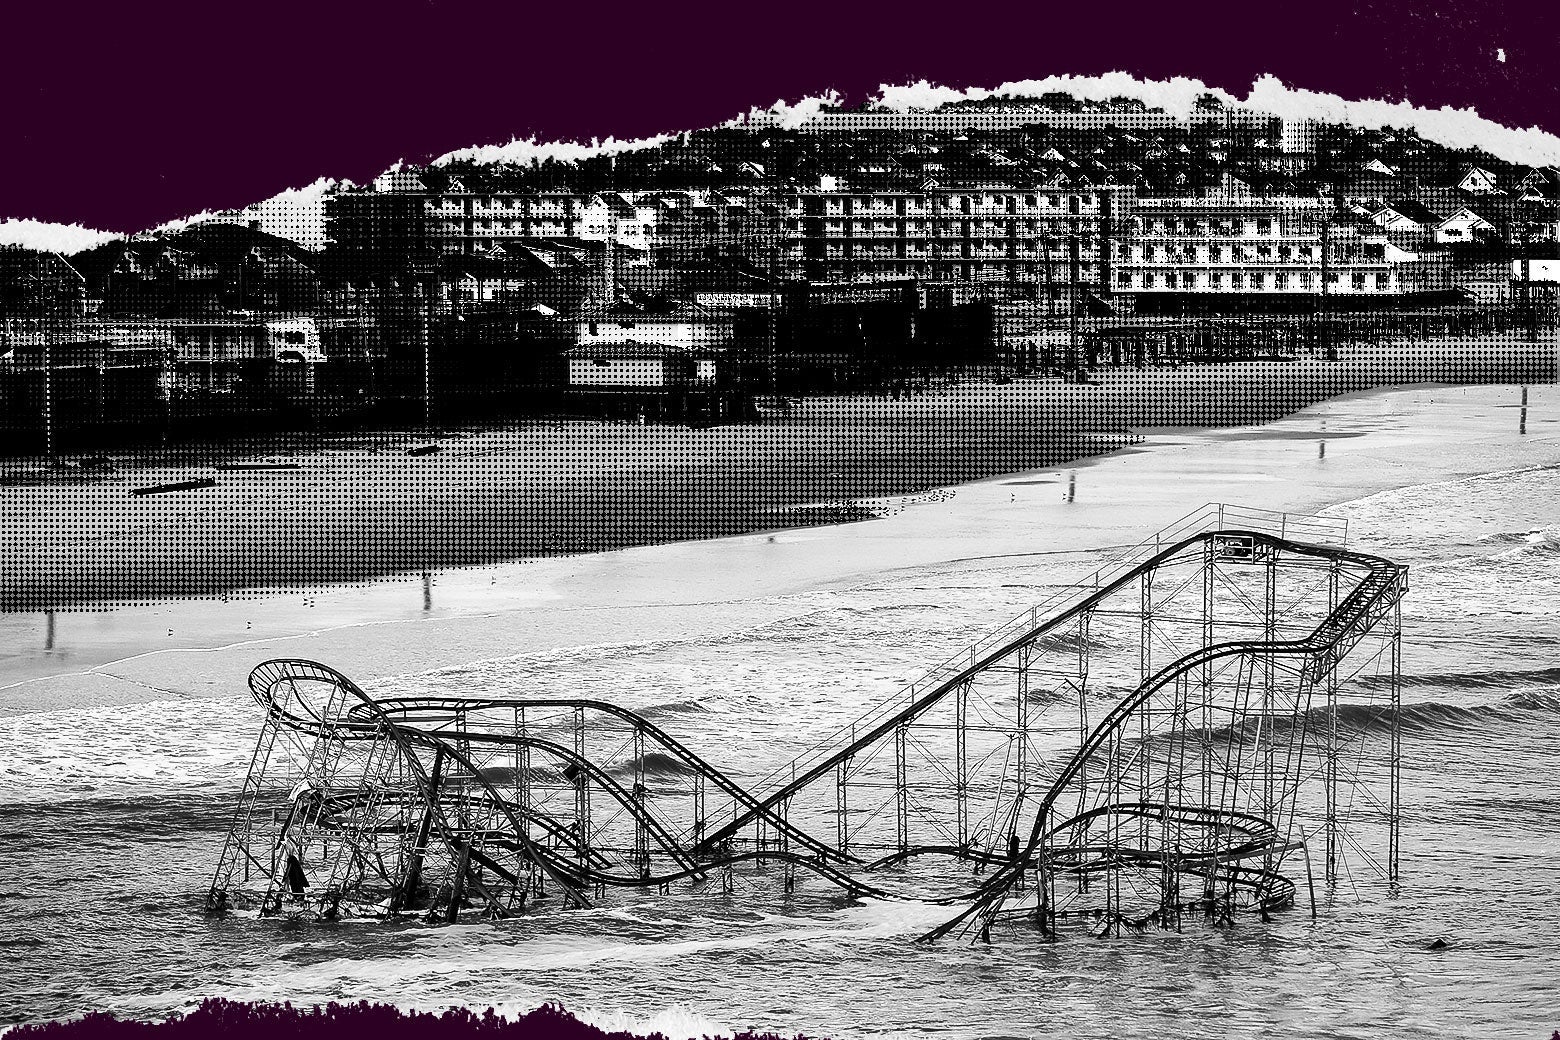 A roller coaster partially submerged by hurricane waters, with boardwalk attractions on the beach in the background.